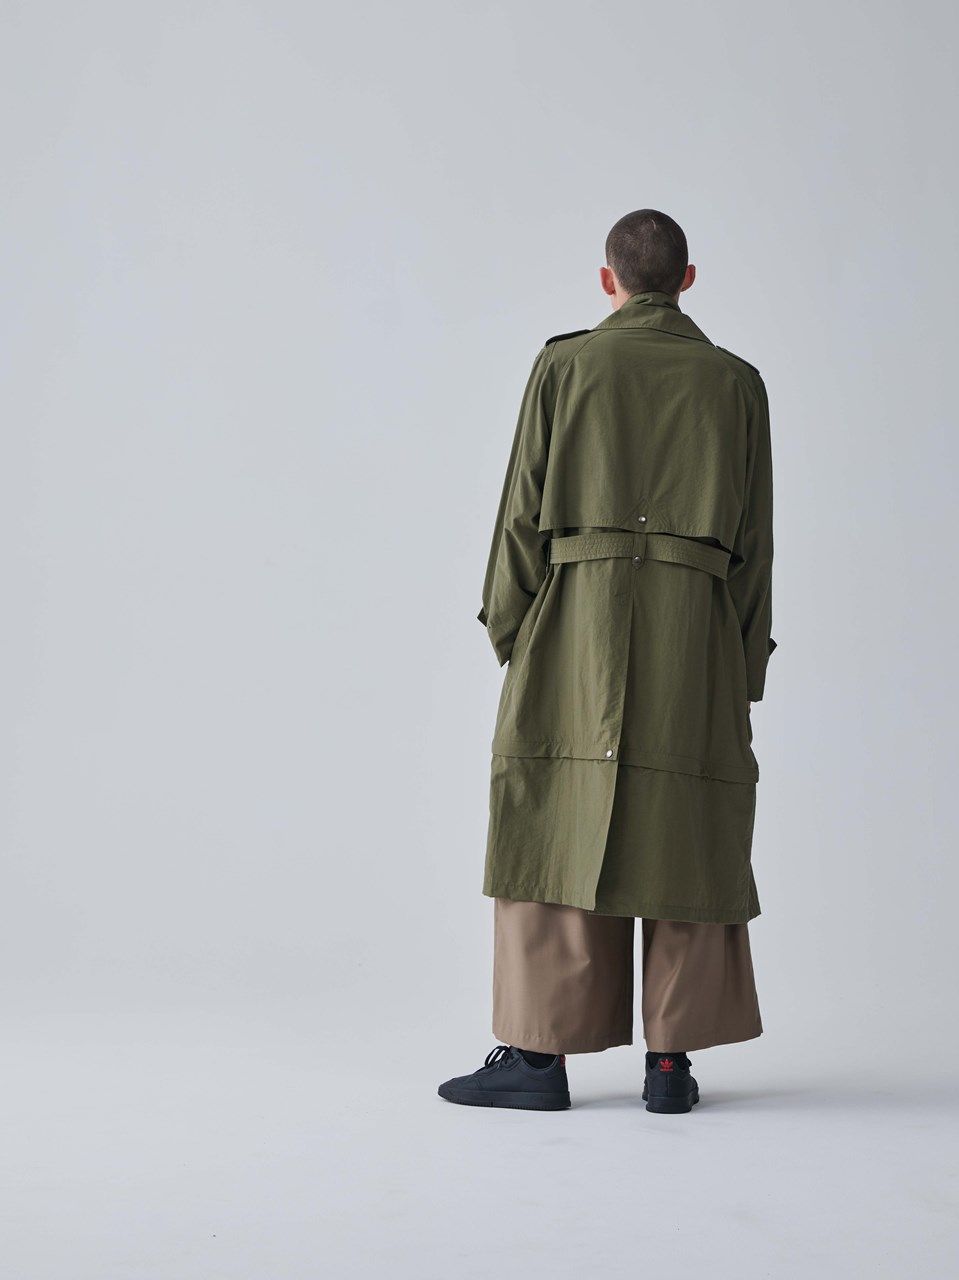 Iroquois - 《予約品.先着限り》 LAYERED TRENCH CO / トレンチコート